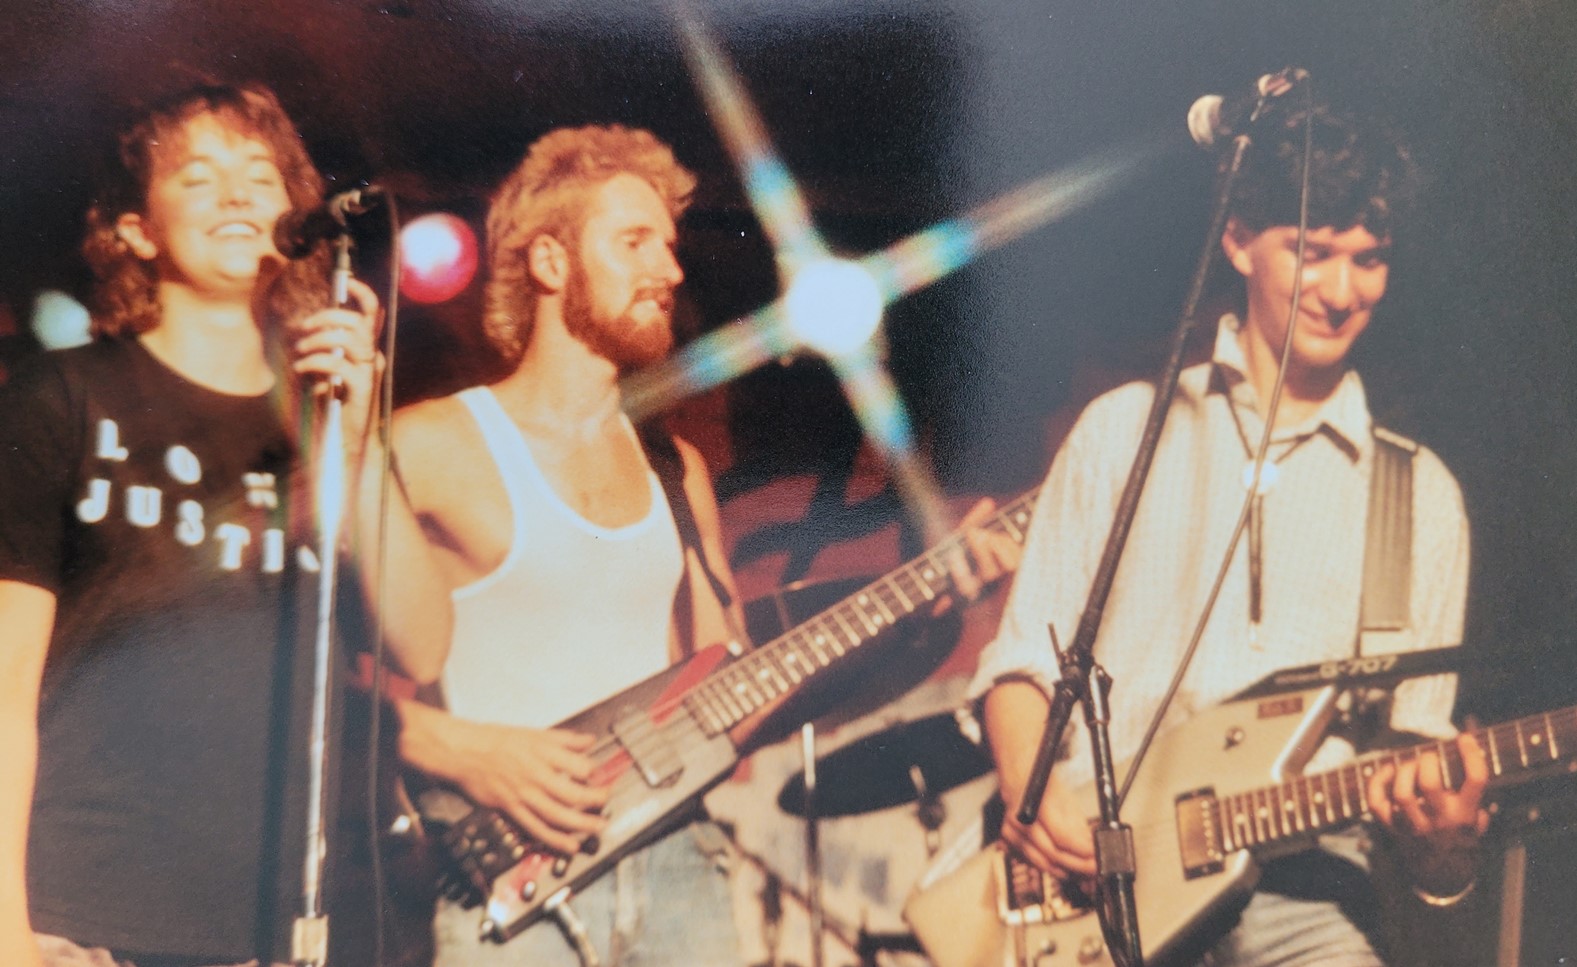 3 musicians on a stage: a female singer, a male bass player, and a male guitar player, all in their early 20s